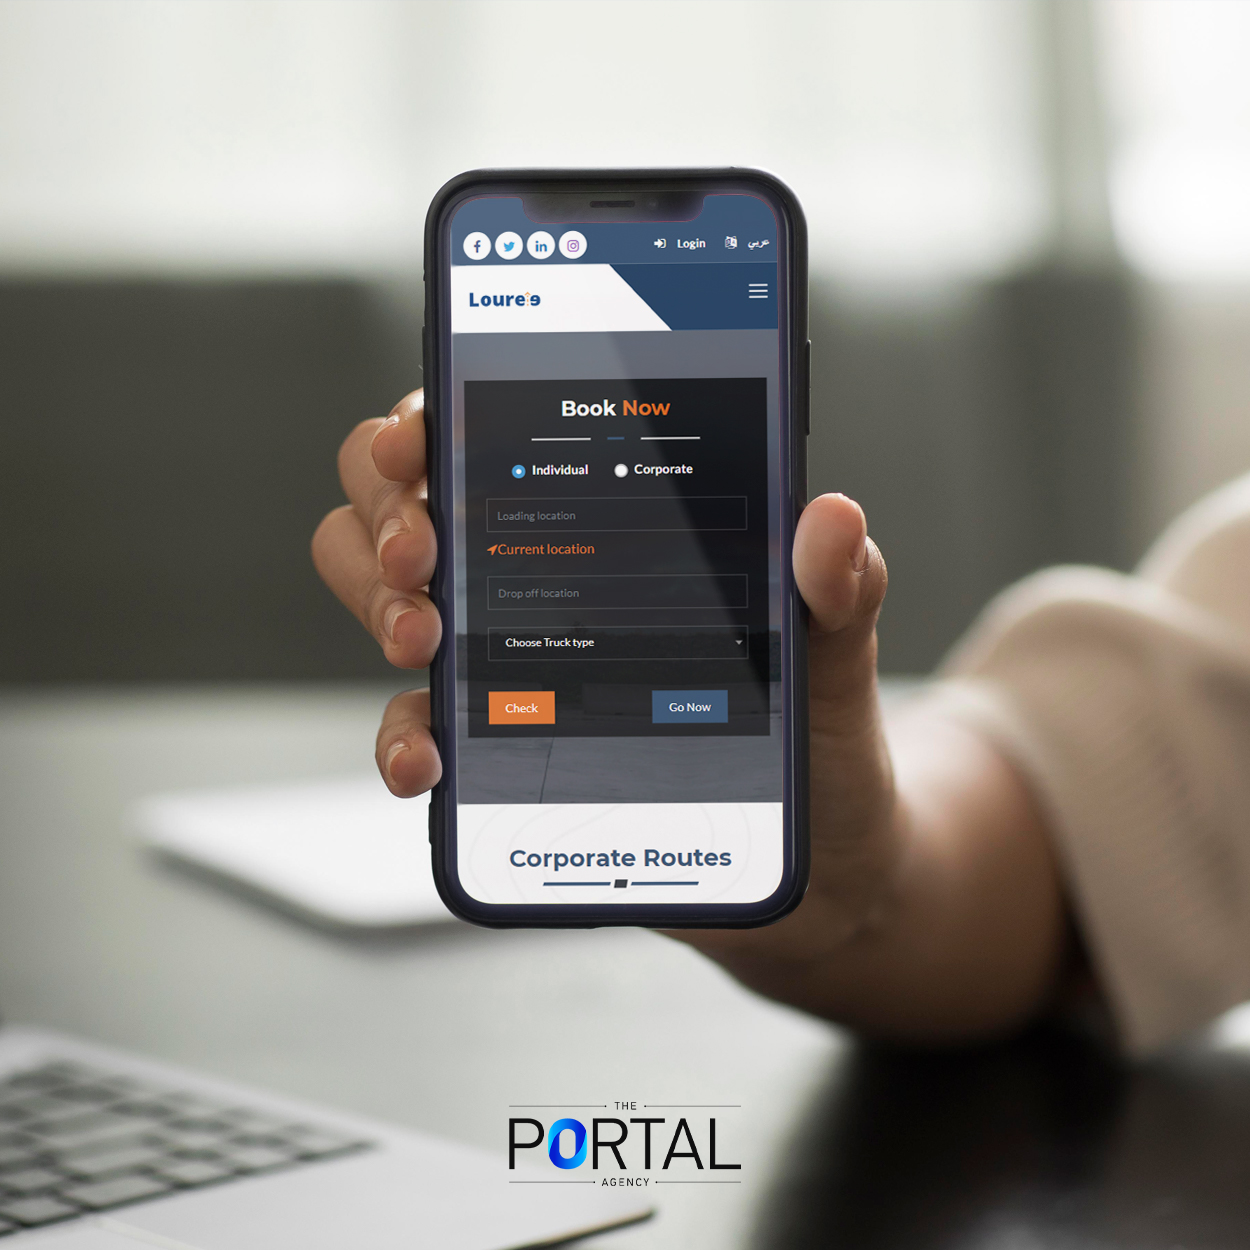 https://theportalagency.com/project/louree-mobile-app/